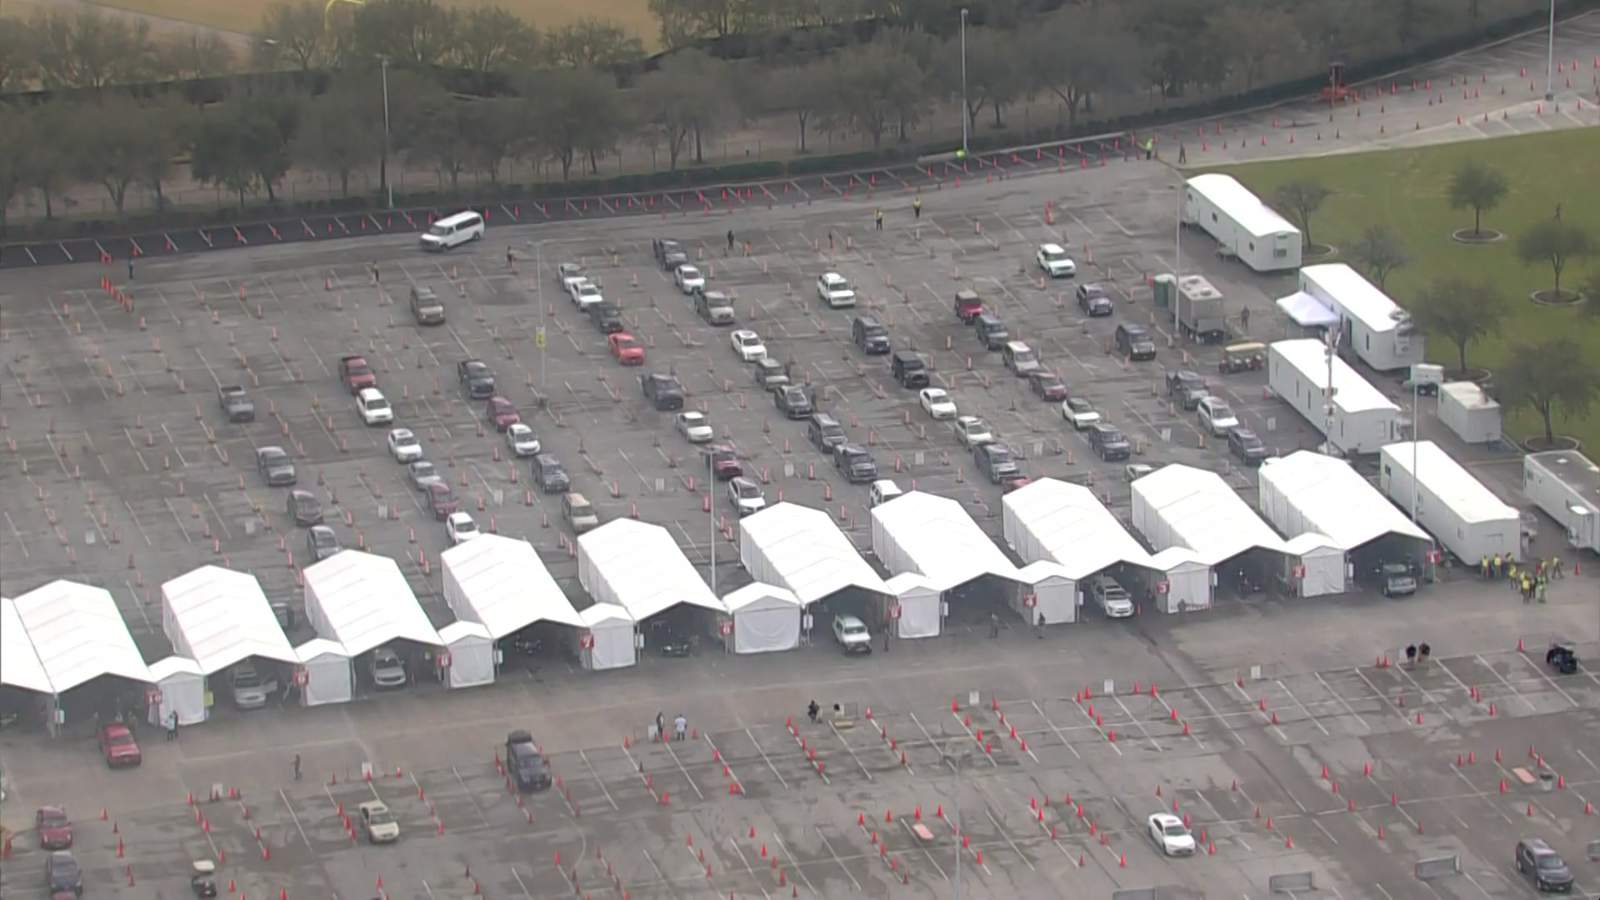 Vehicles line up at a vaccine clinic at NRG Park in Houston on Feb. 26, 2021.